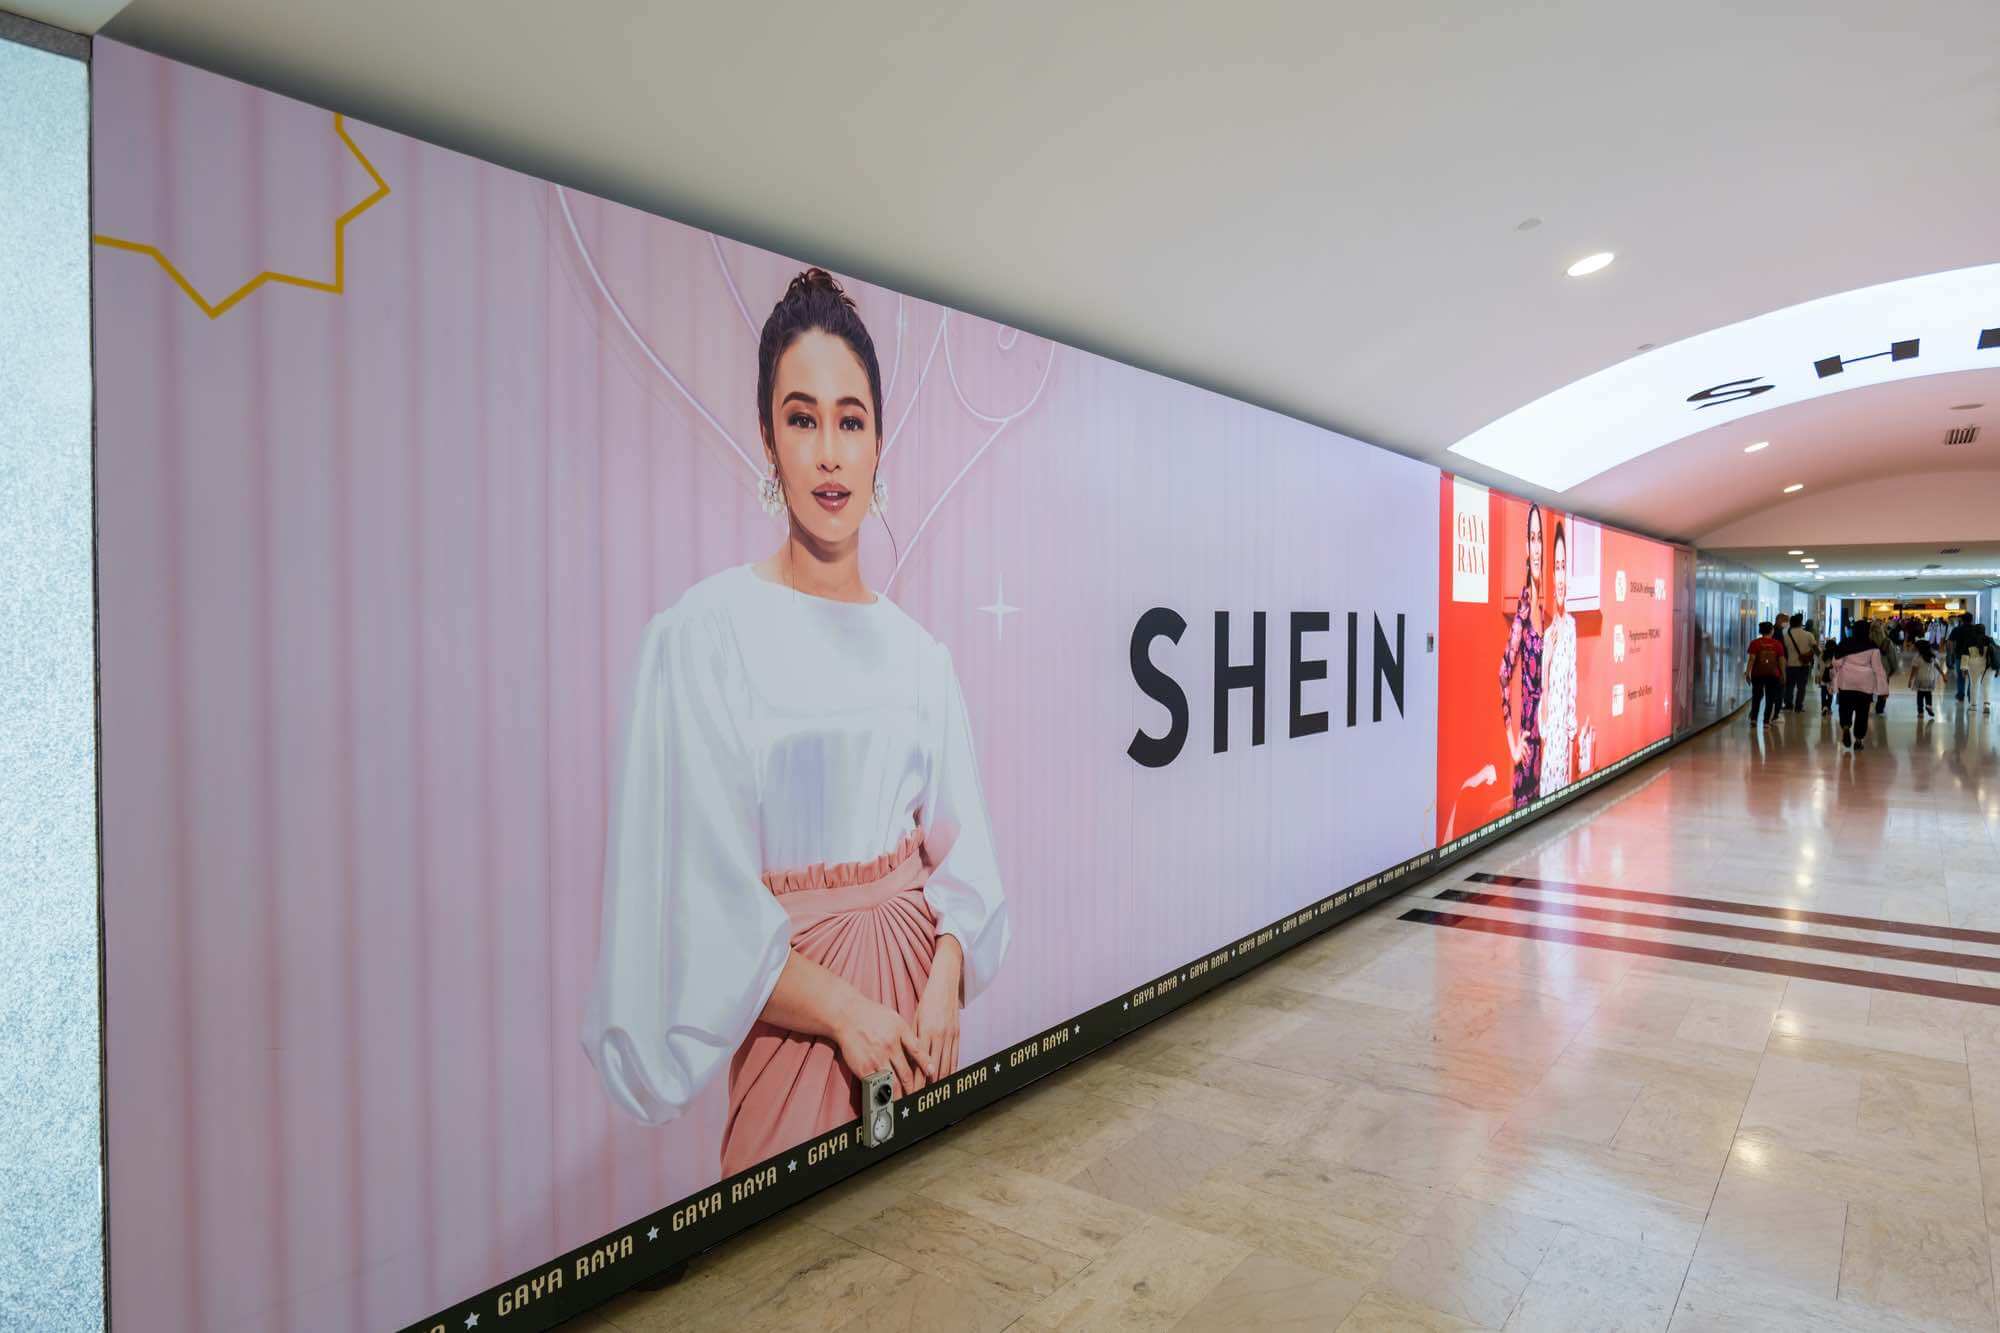 Shein pumps out tonnes more pollution than its rivals to cash in on  Britain's cheap clothes obsession